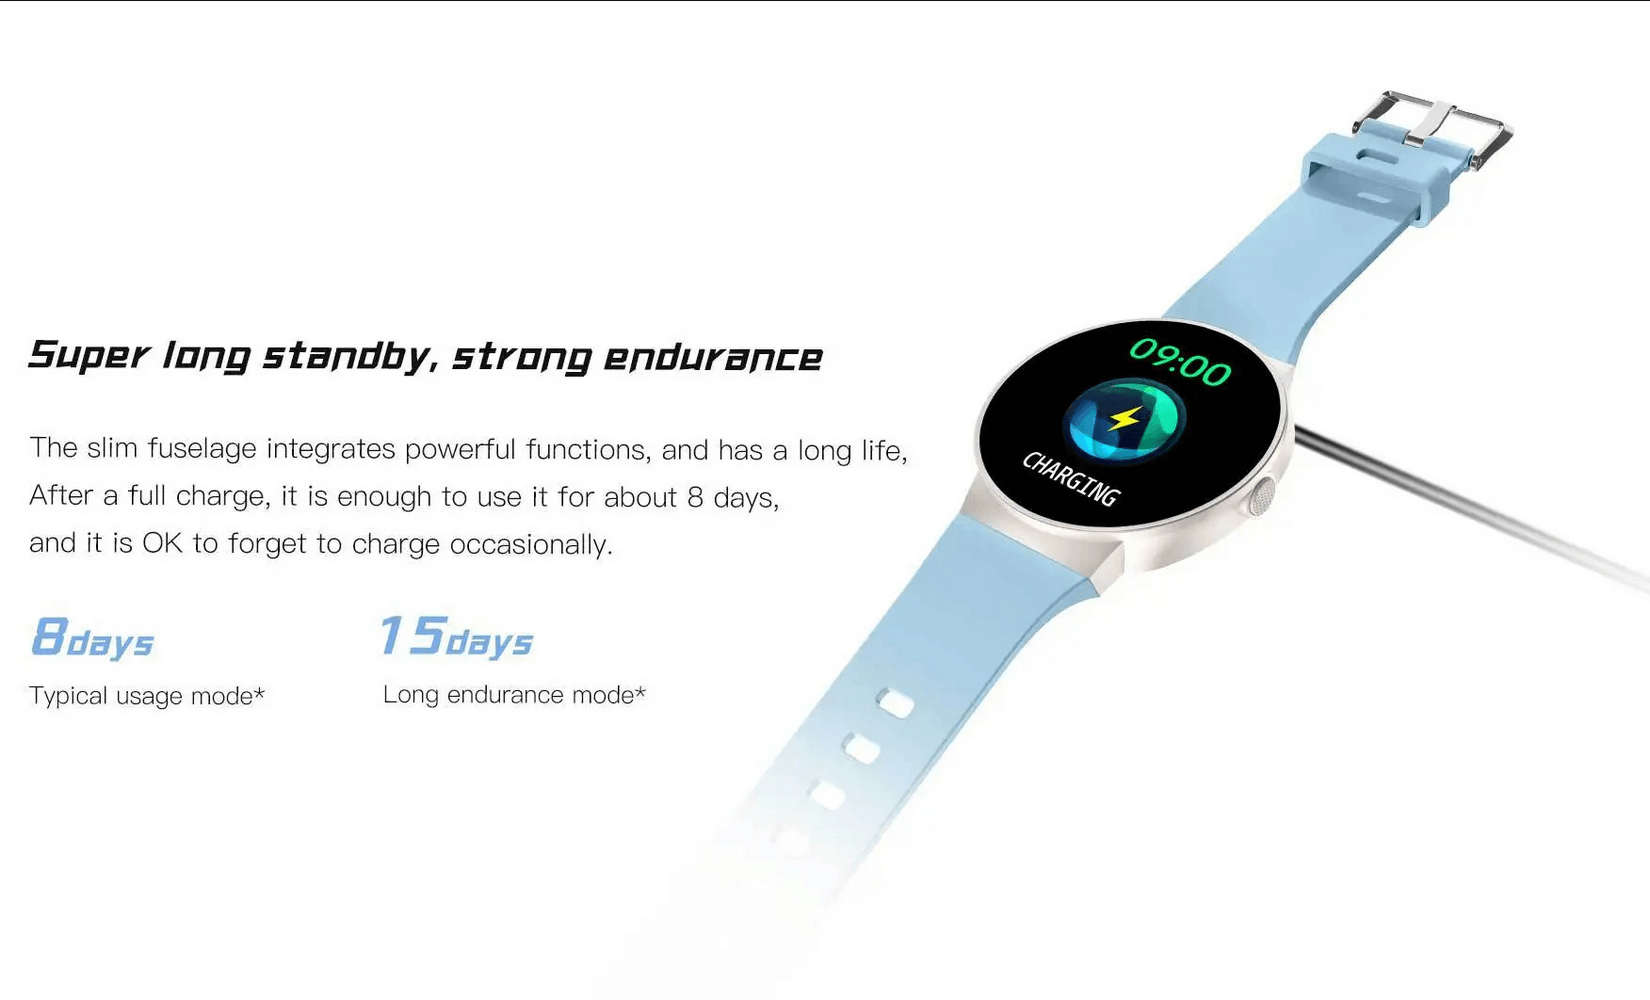 Android OS Smart Watch with Heart Rate Tracker - SF2131